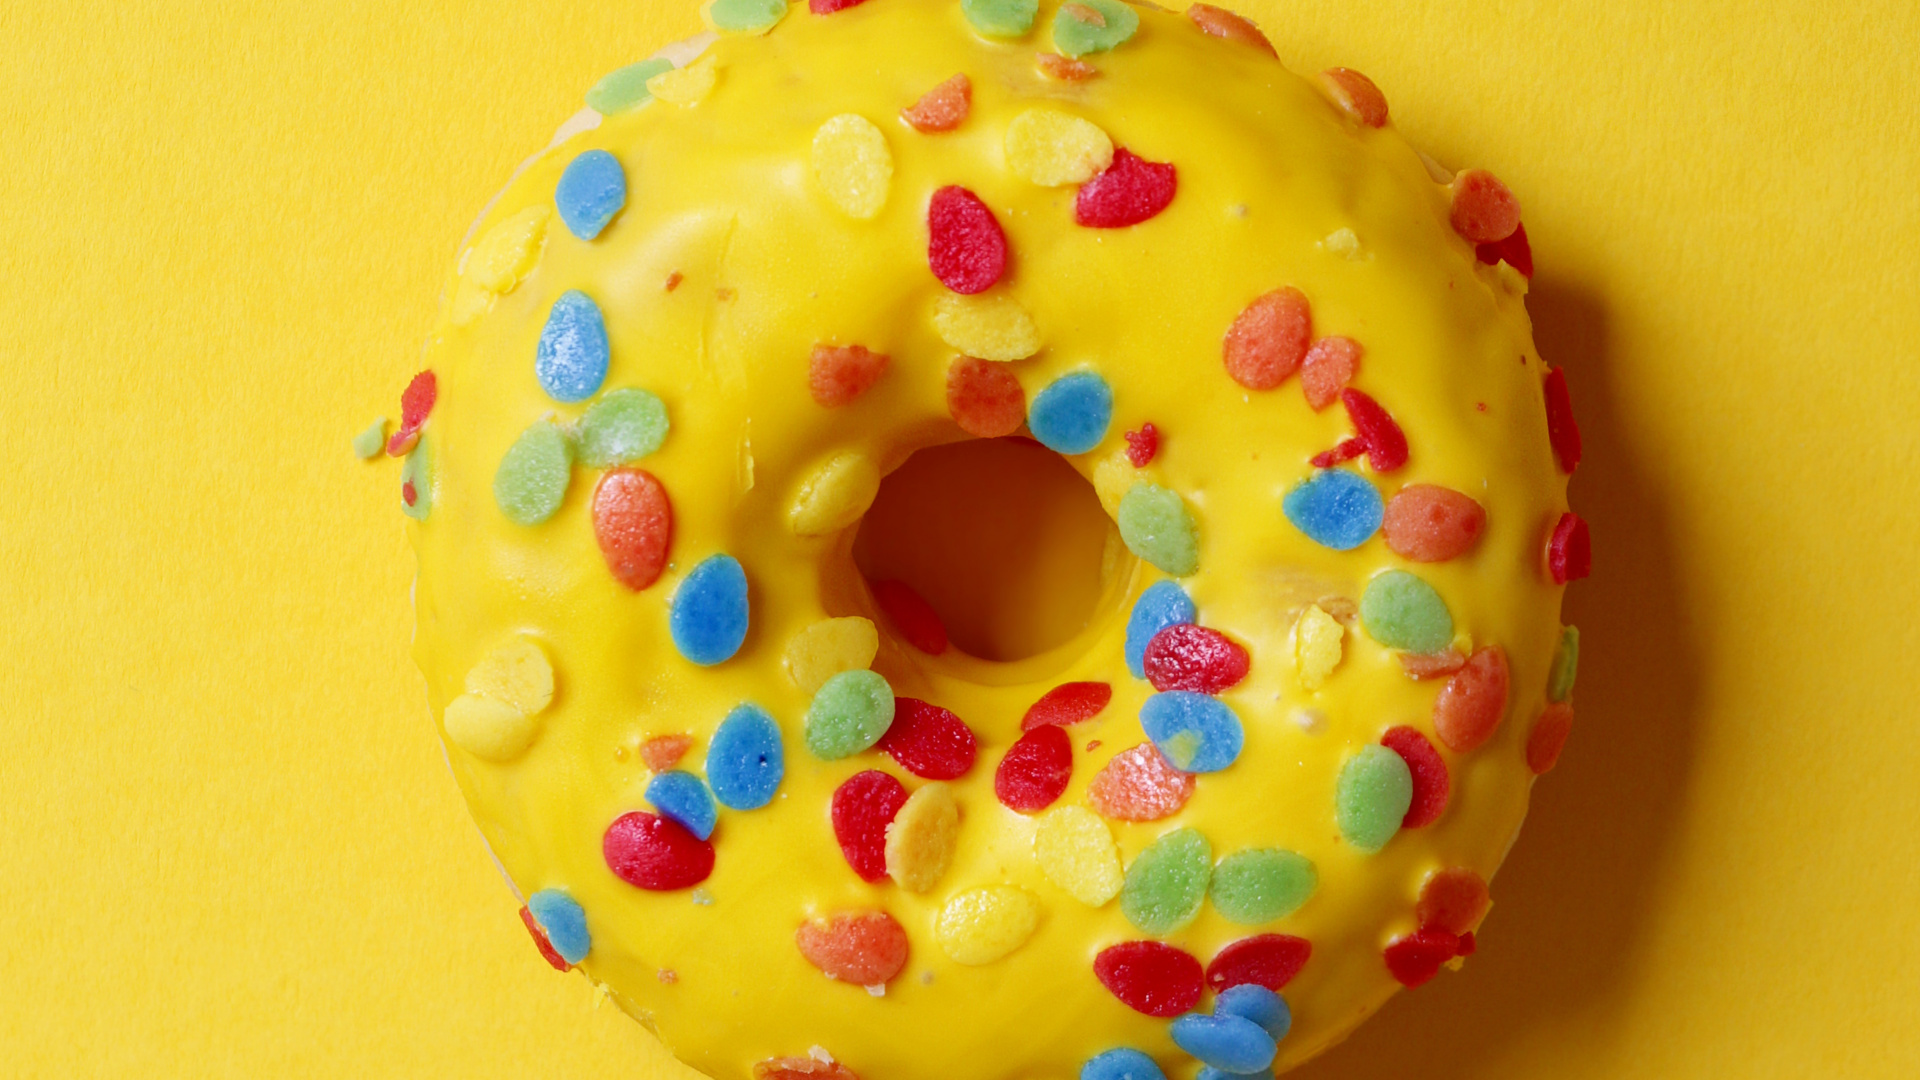 Doughnut With Sprinkles on Yellow Surface. Wallpaper in 1920x1080 Resolution